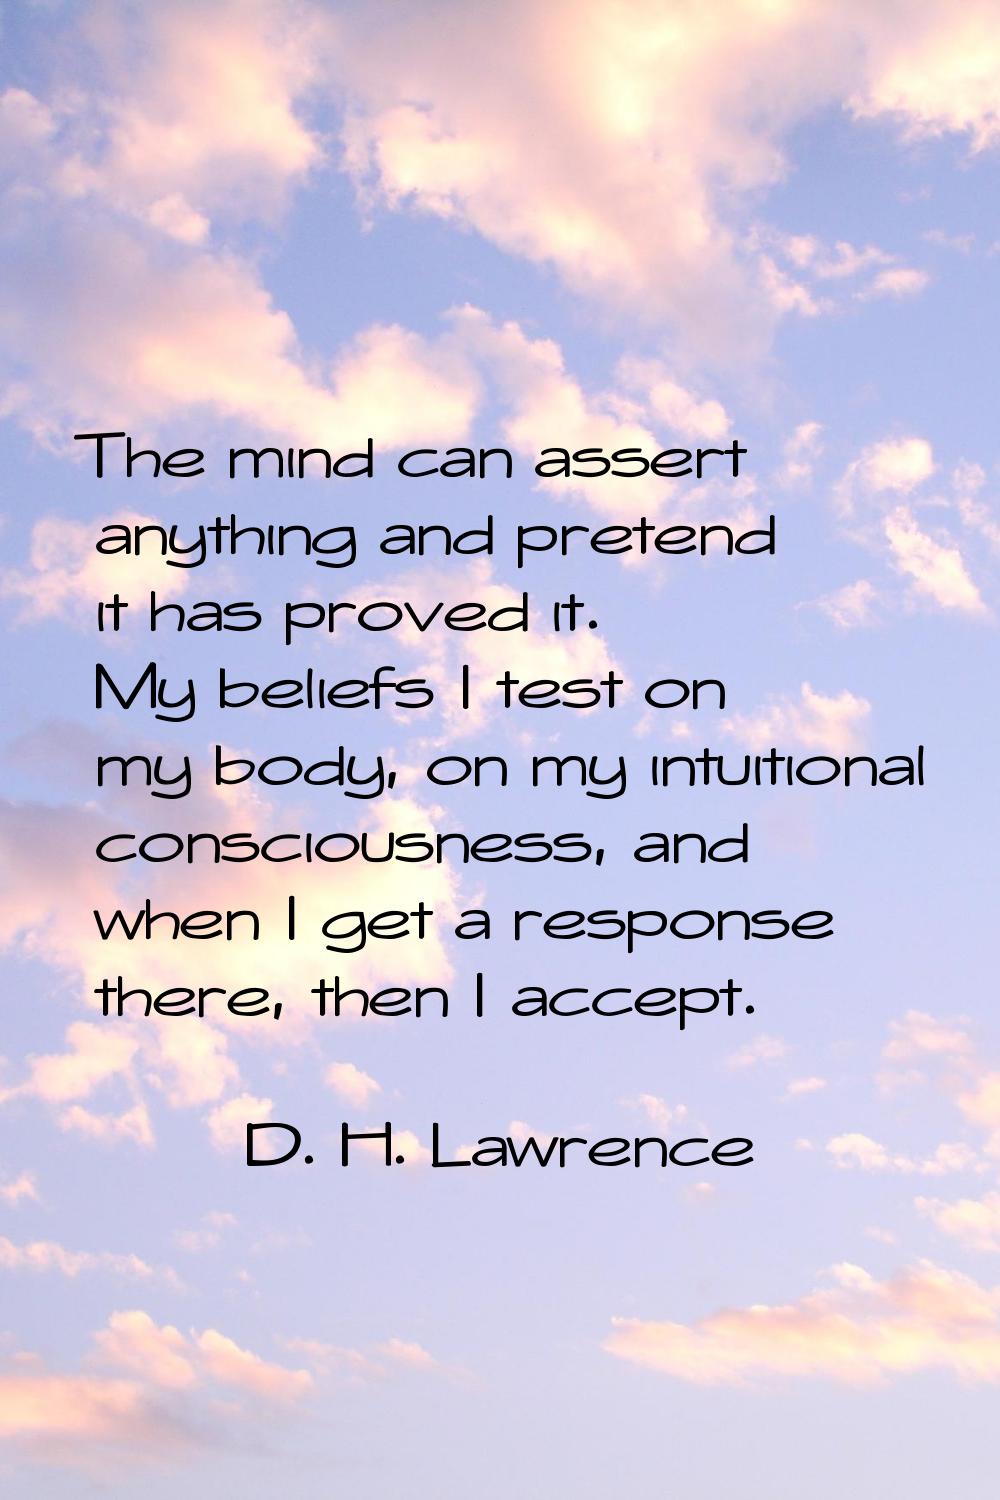 The mind can assert anything and pretend it has proved it. My beliefs I test on my body, on my intu